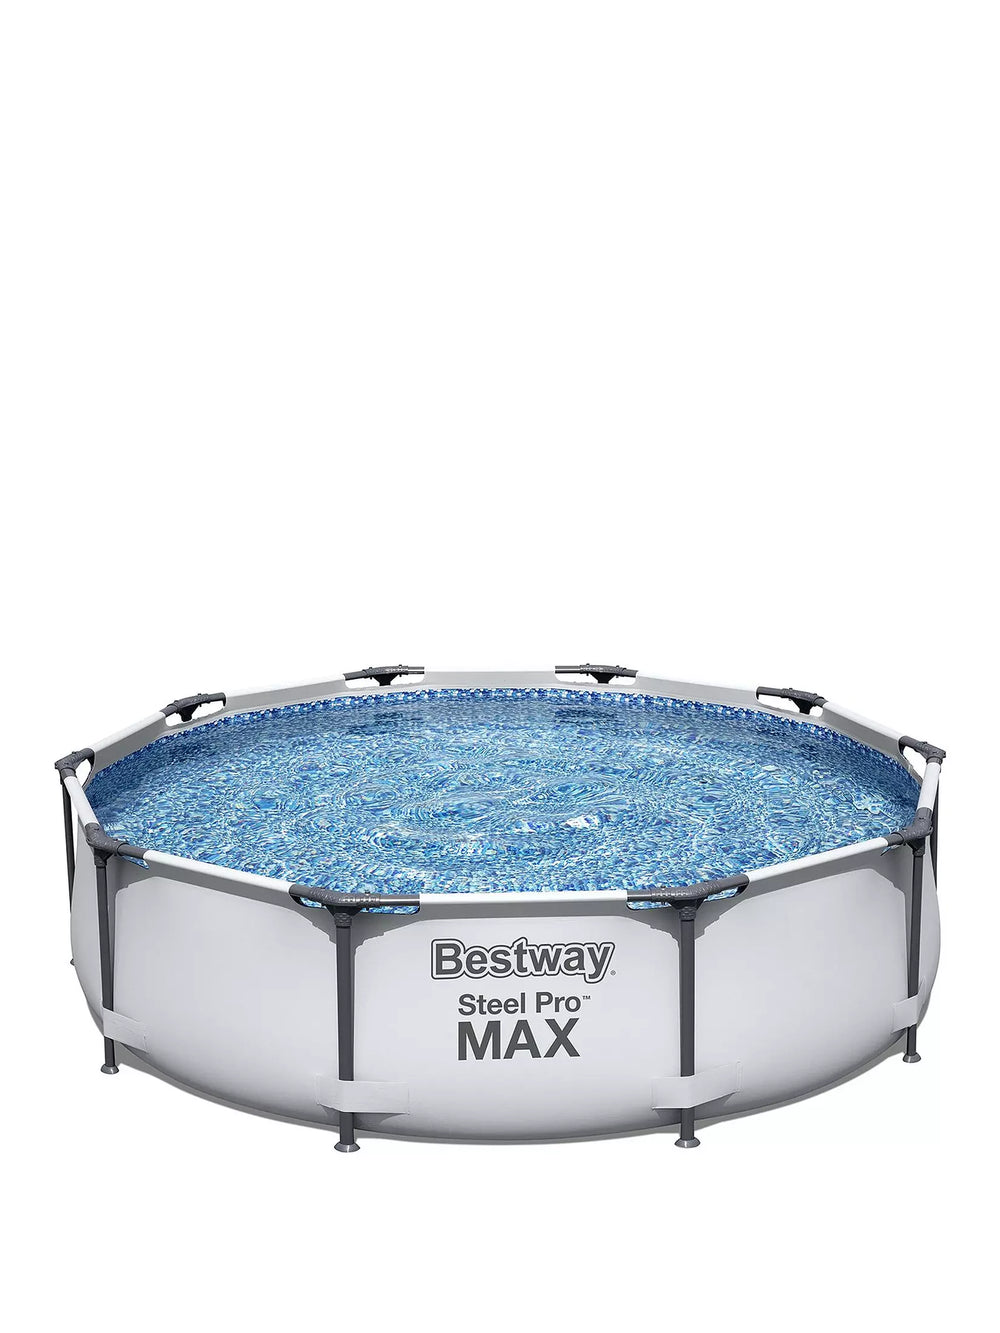 Bestway 10ft Steel Pro MAX Pool with Filter Pump